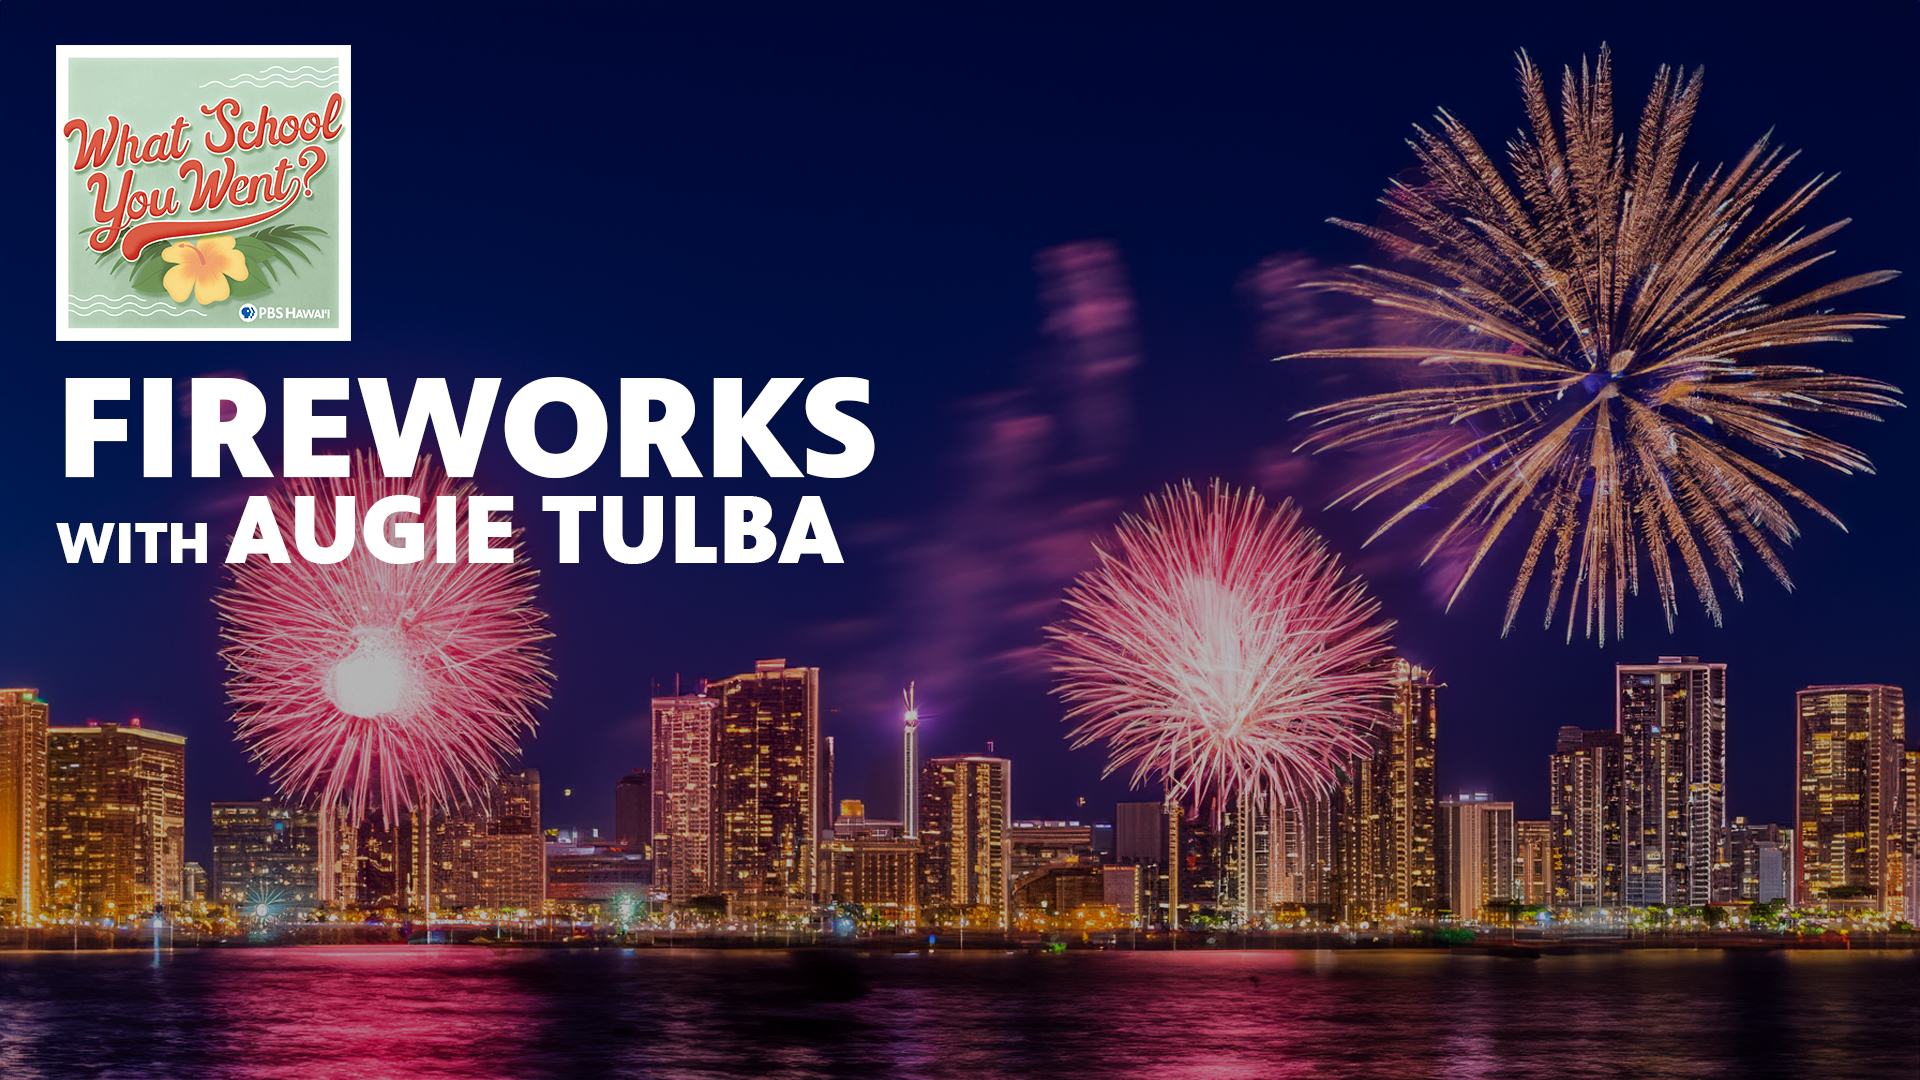 Fireworks with Augie Tulba